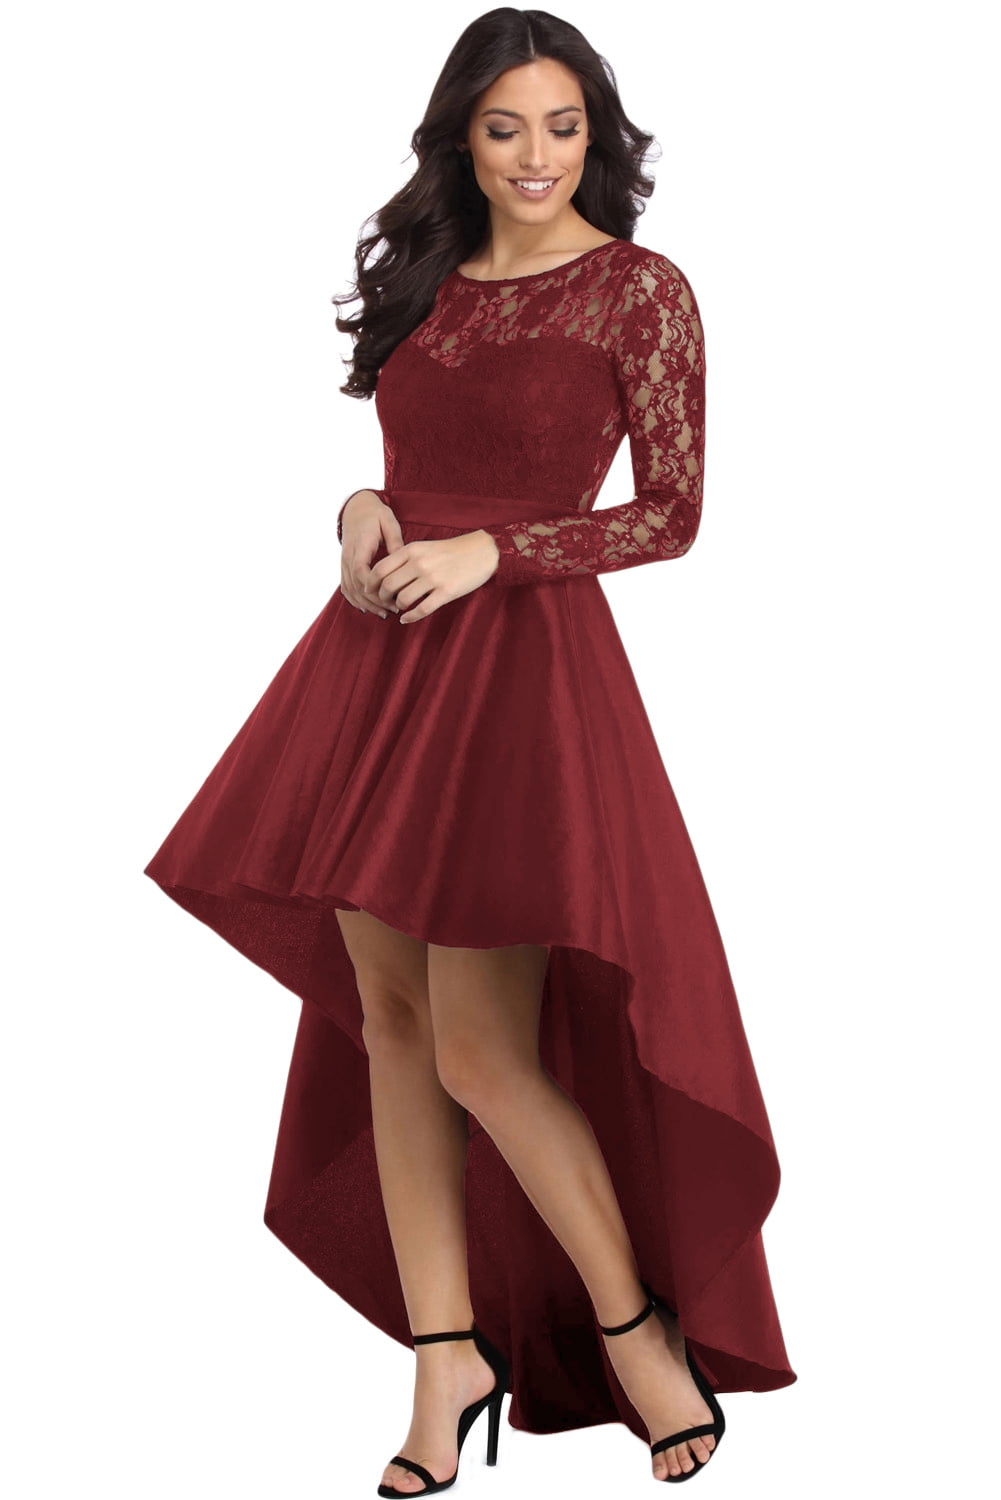 3D Floral Lace Applique A Line High Low Prom Dresses High/Low Cut For  Womens Evening Occasions And Cocktail Parties From Chicweddings, $81.11 |  DHgate.Com